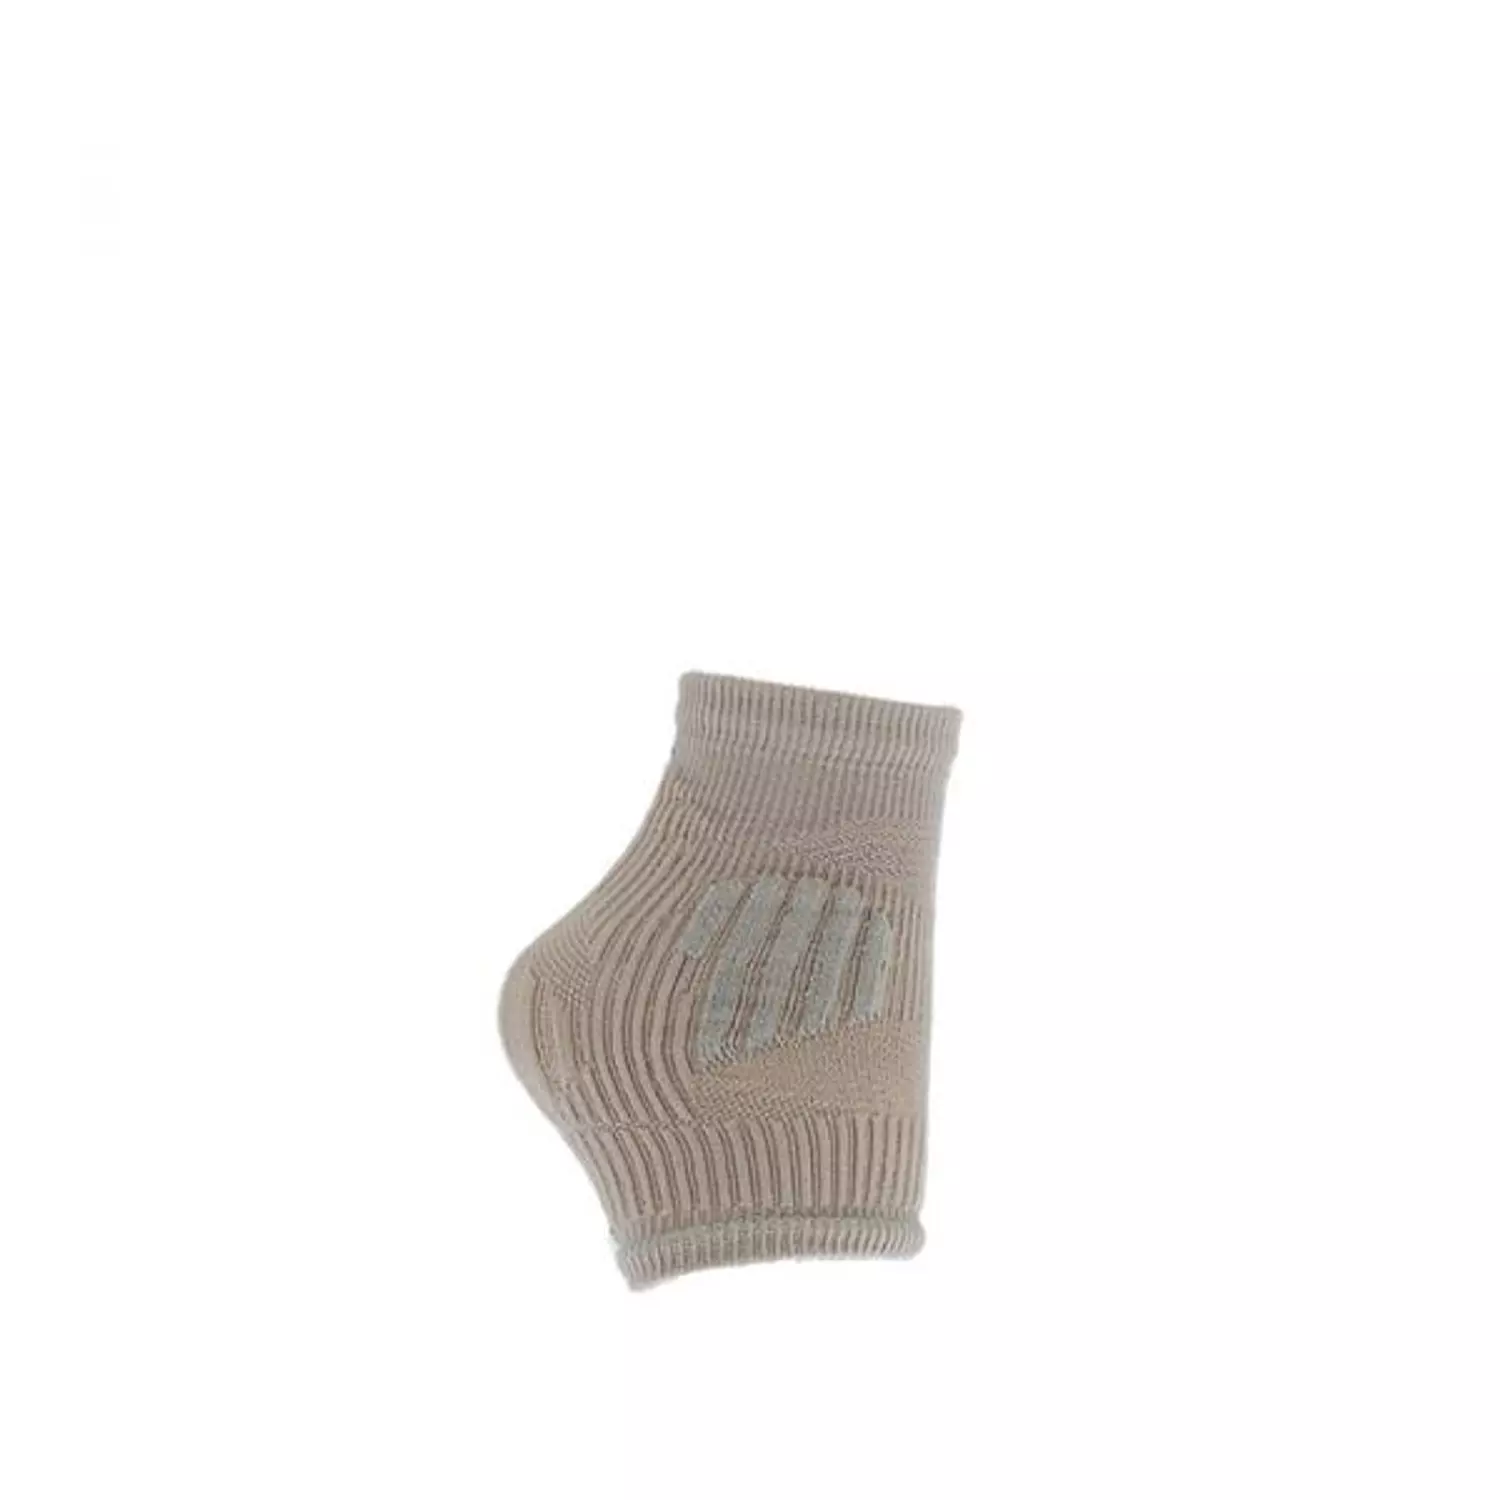 KINESIA - K912 Ankle Support Kineplus Low-Cut Compression Socks (One Size) 3